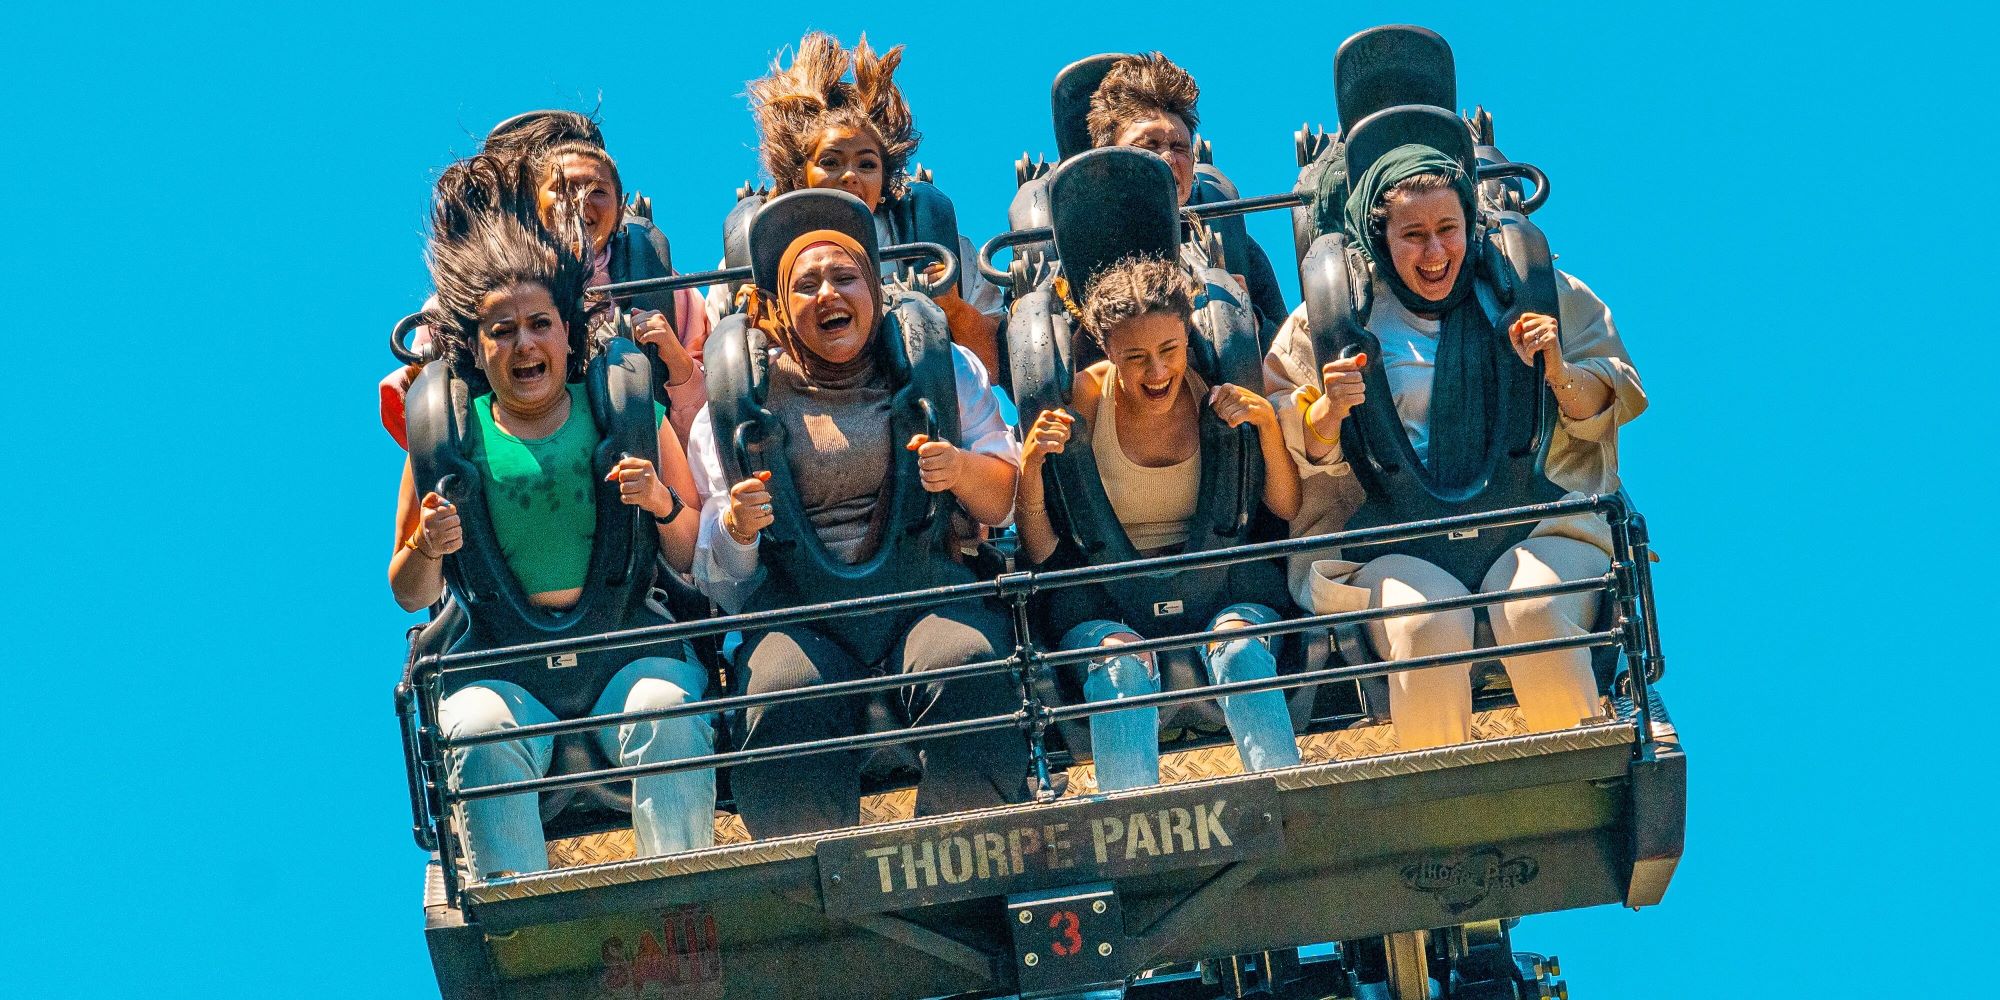 Bums and boobs: When Thorpe Park's Nemesis Inferno got the naked rollercoaster  ride world record - Surrey Live